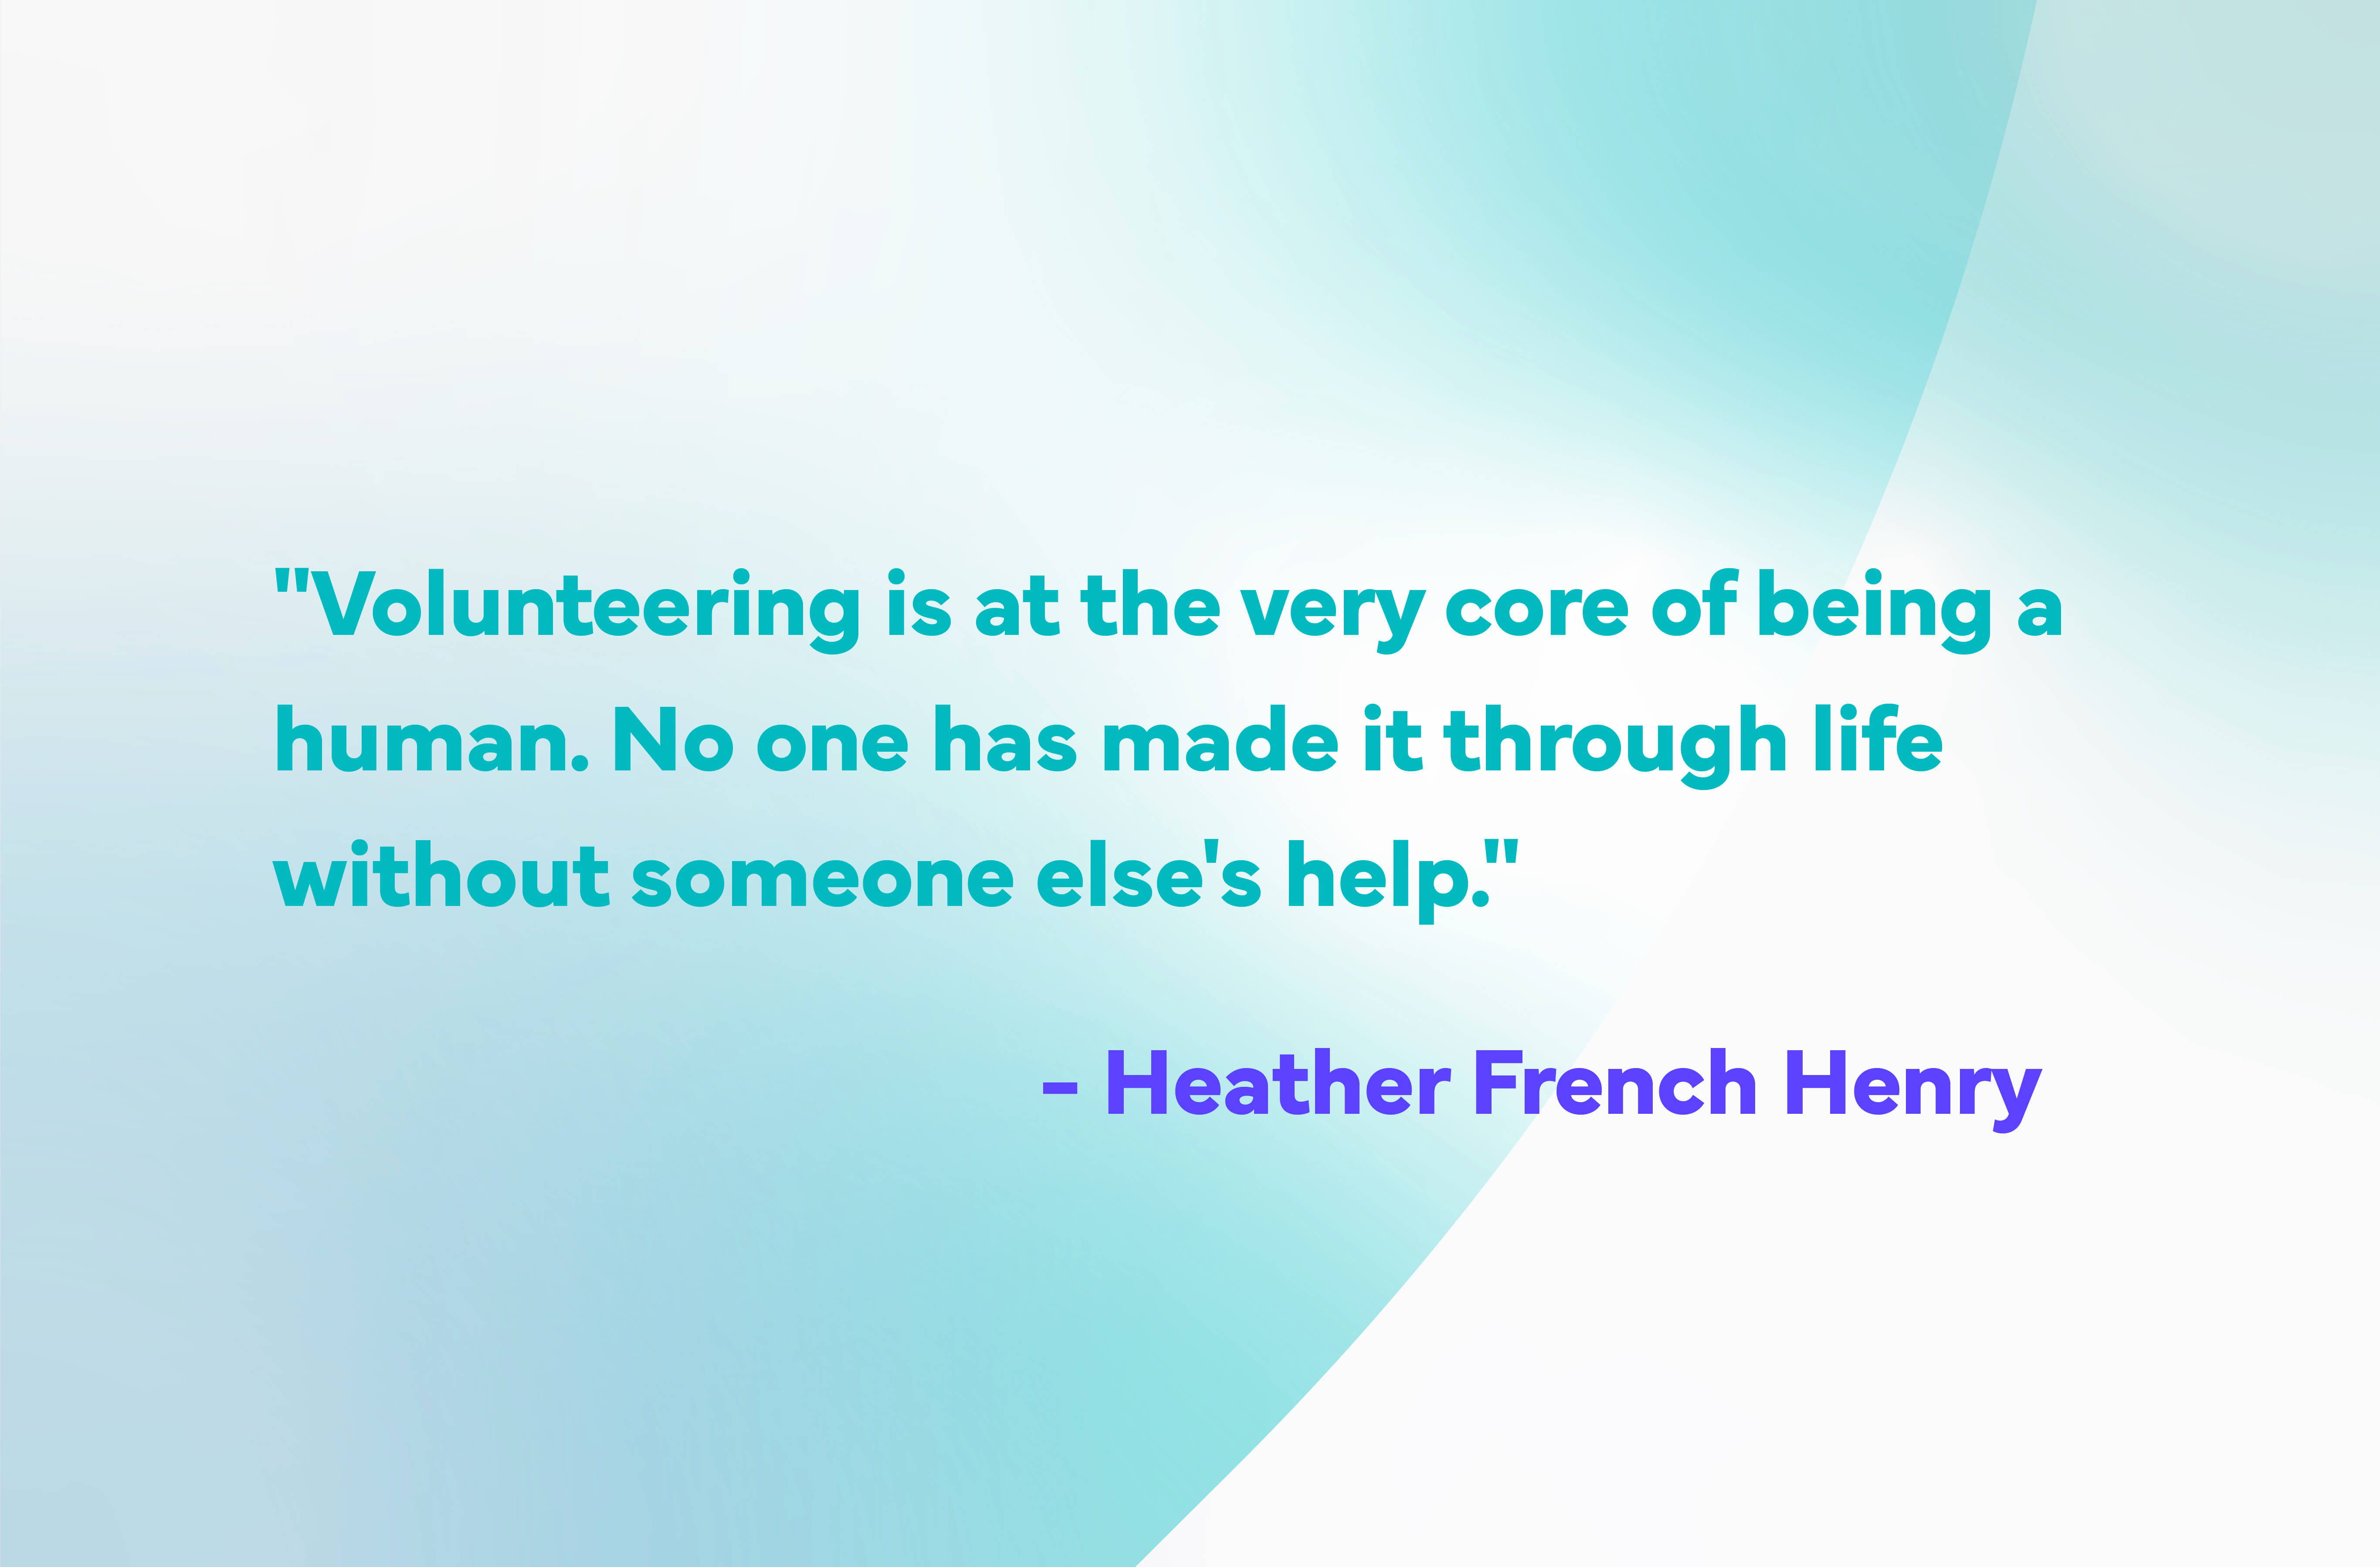 Volunteer-Quotes-heather-french-henry volunteering is at the core of being human (3)